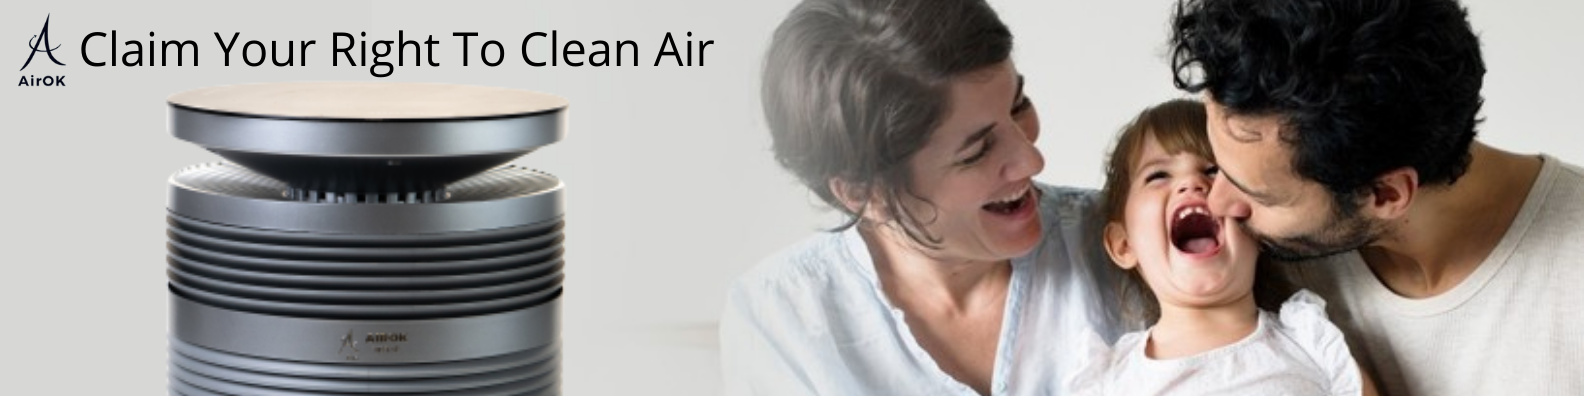 Air purifier for allergies and dust